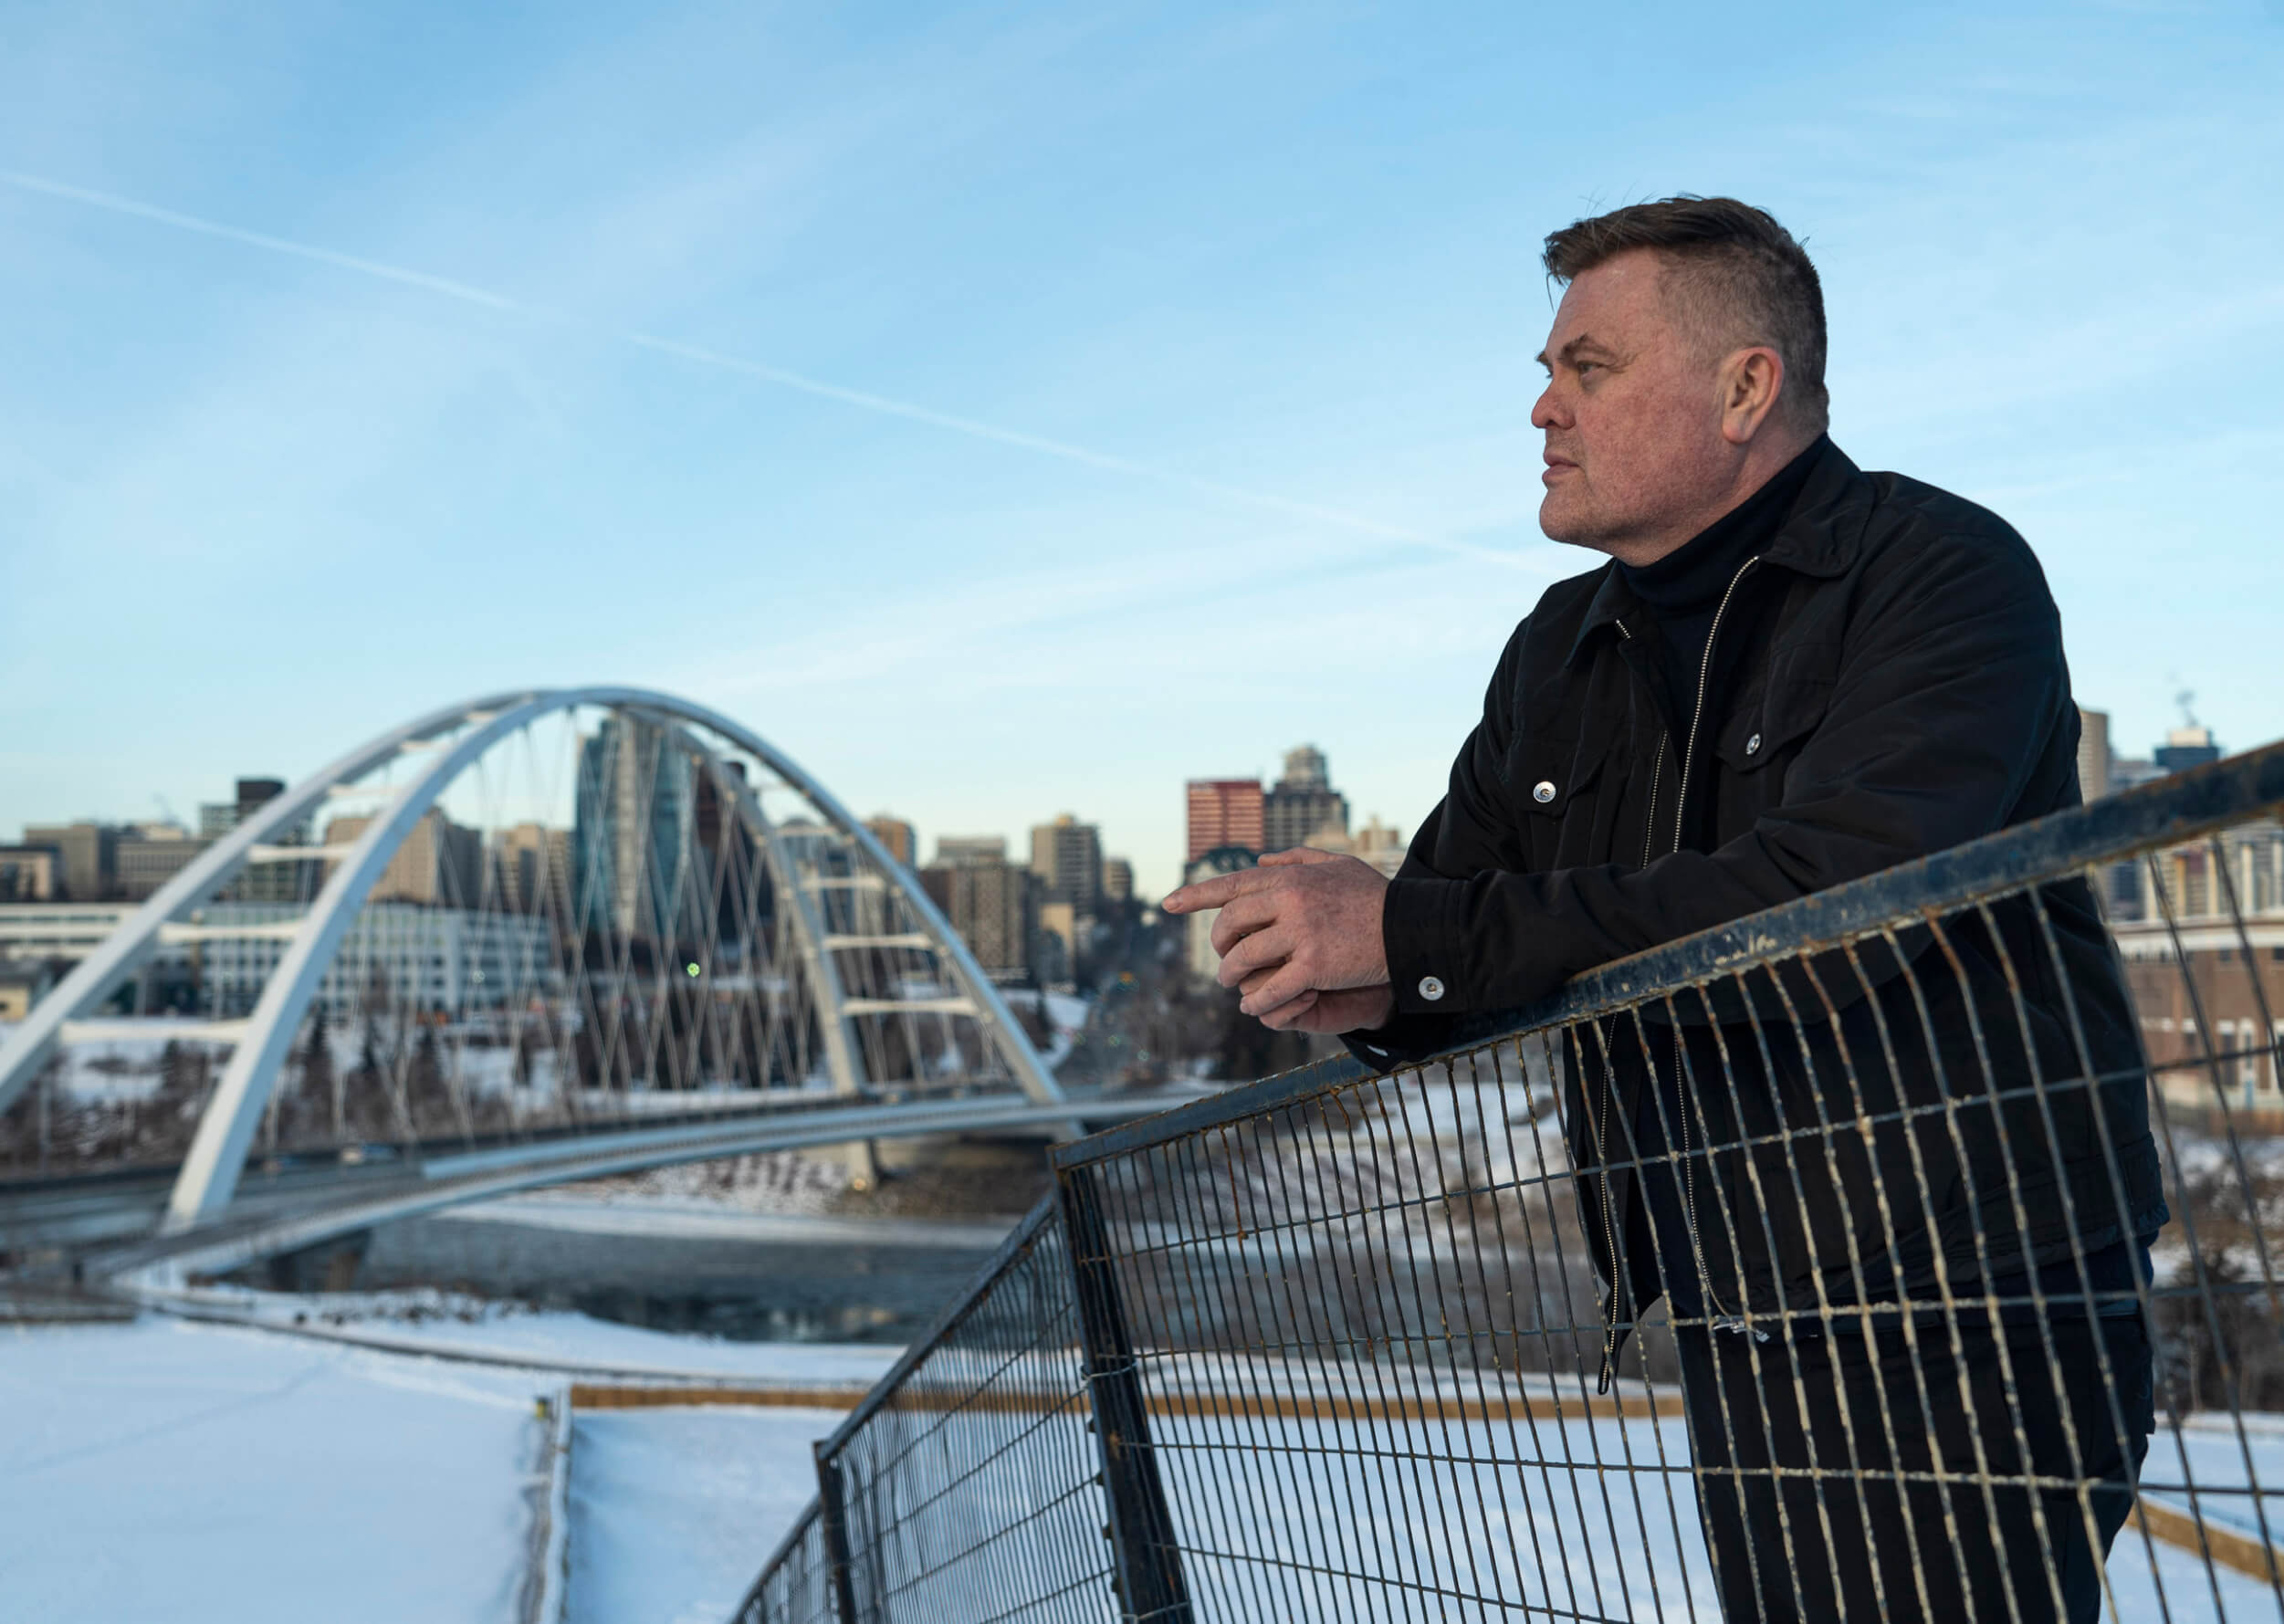 Dr. Wayne Clark with a view of the Walter Dale Bridge in Edmonton in winter